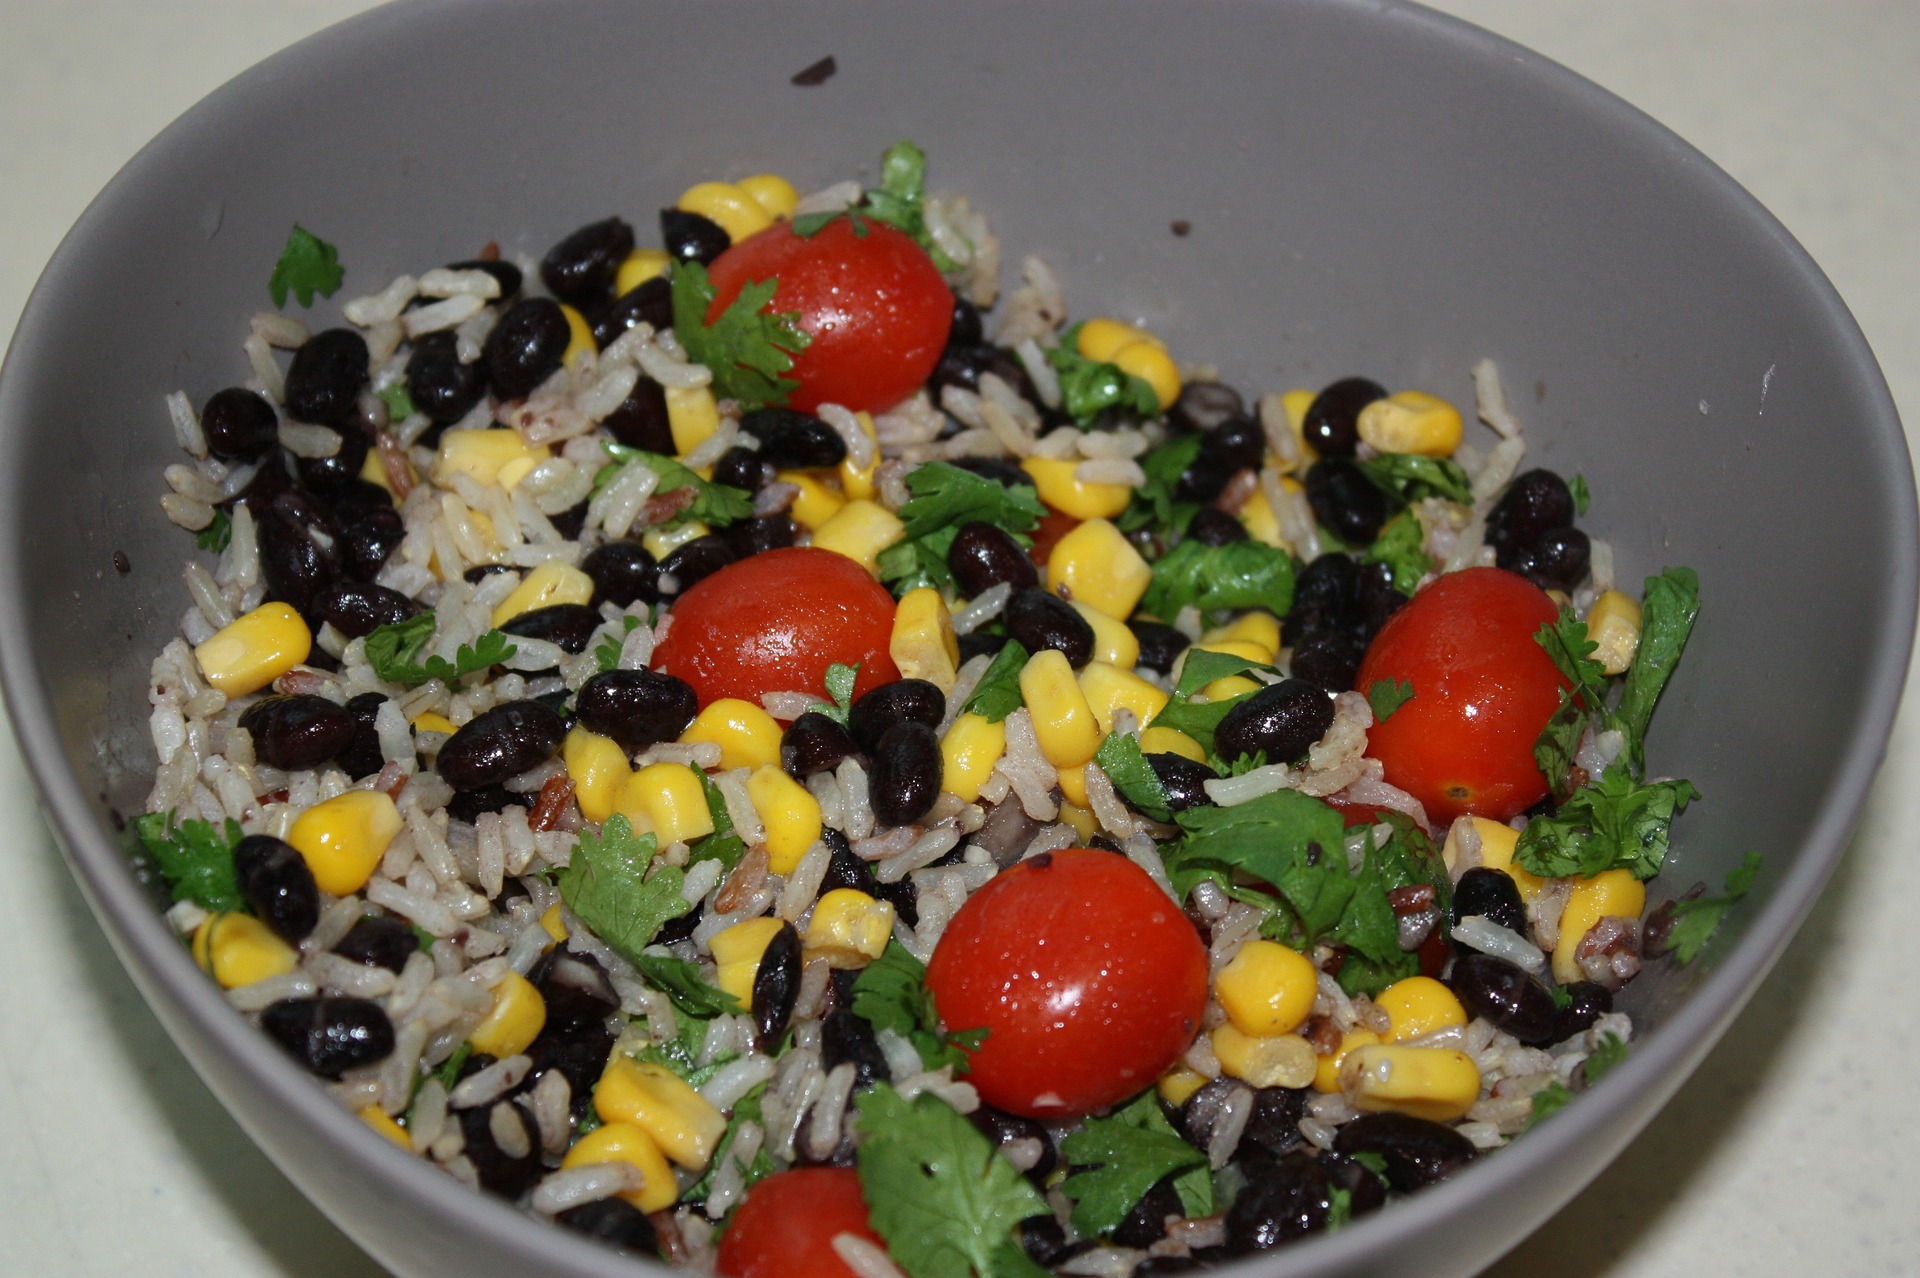 Black beans and other ingredients in a salad